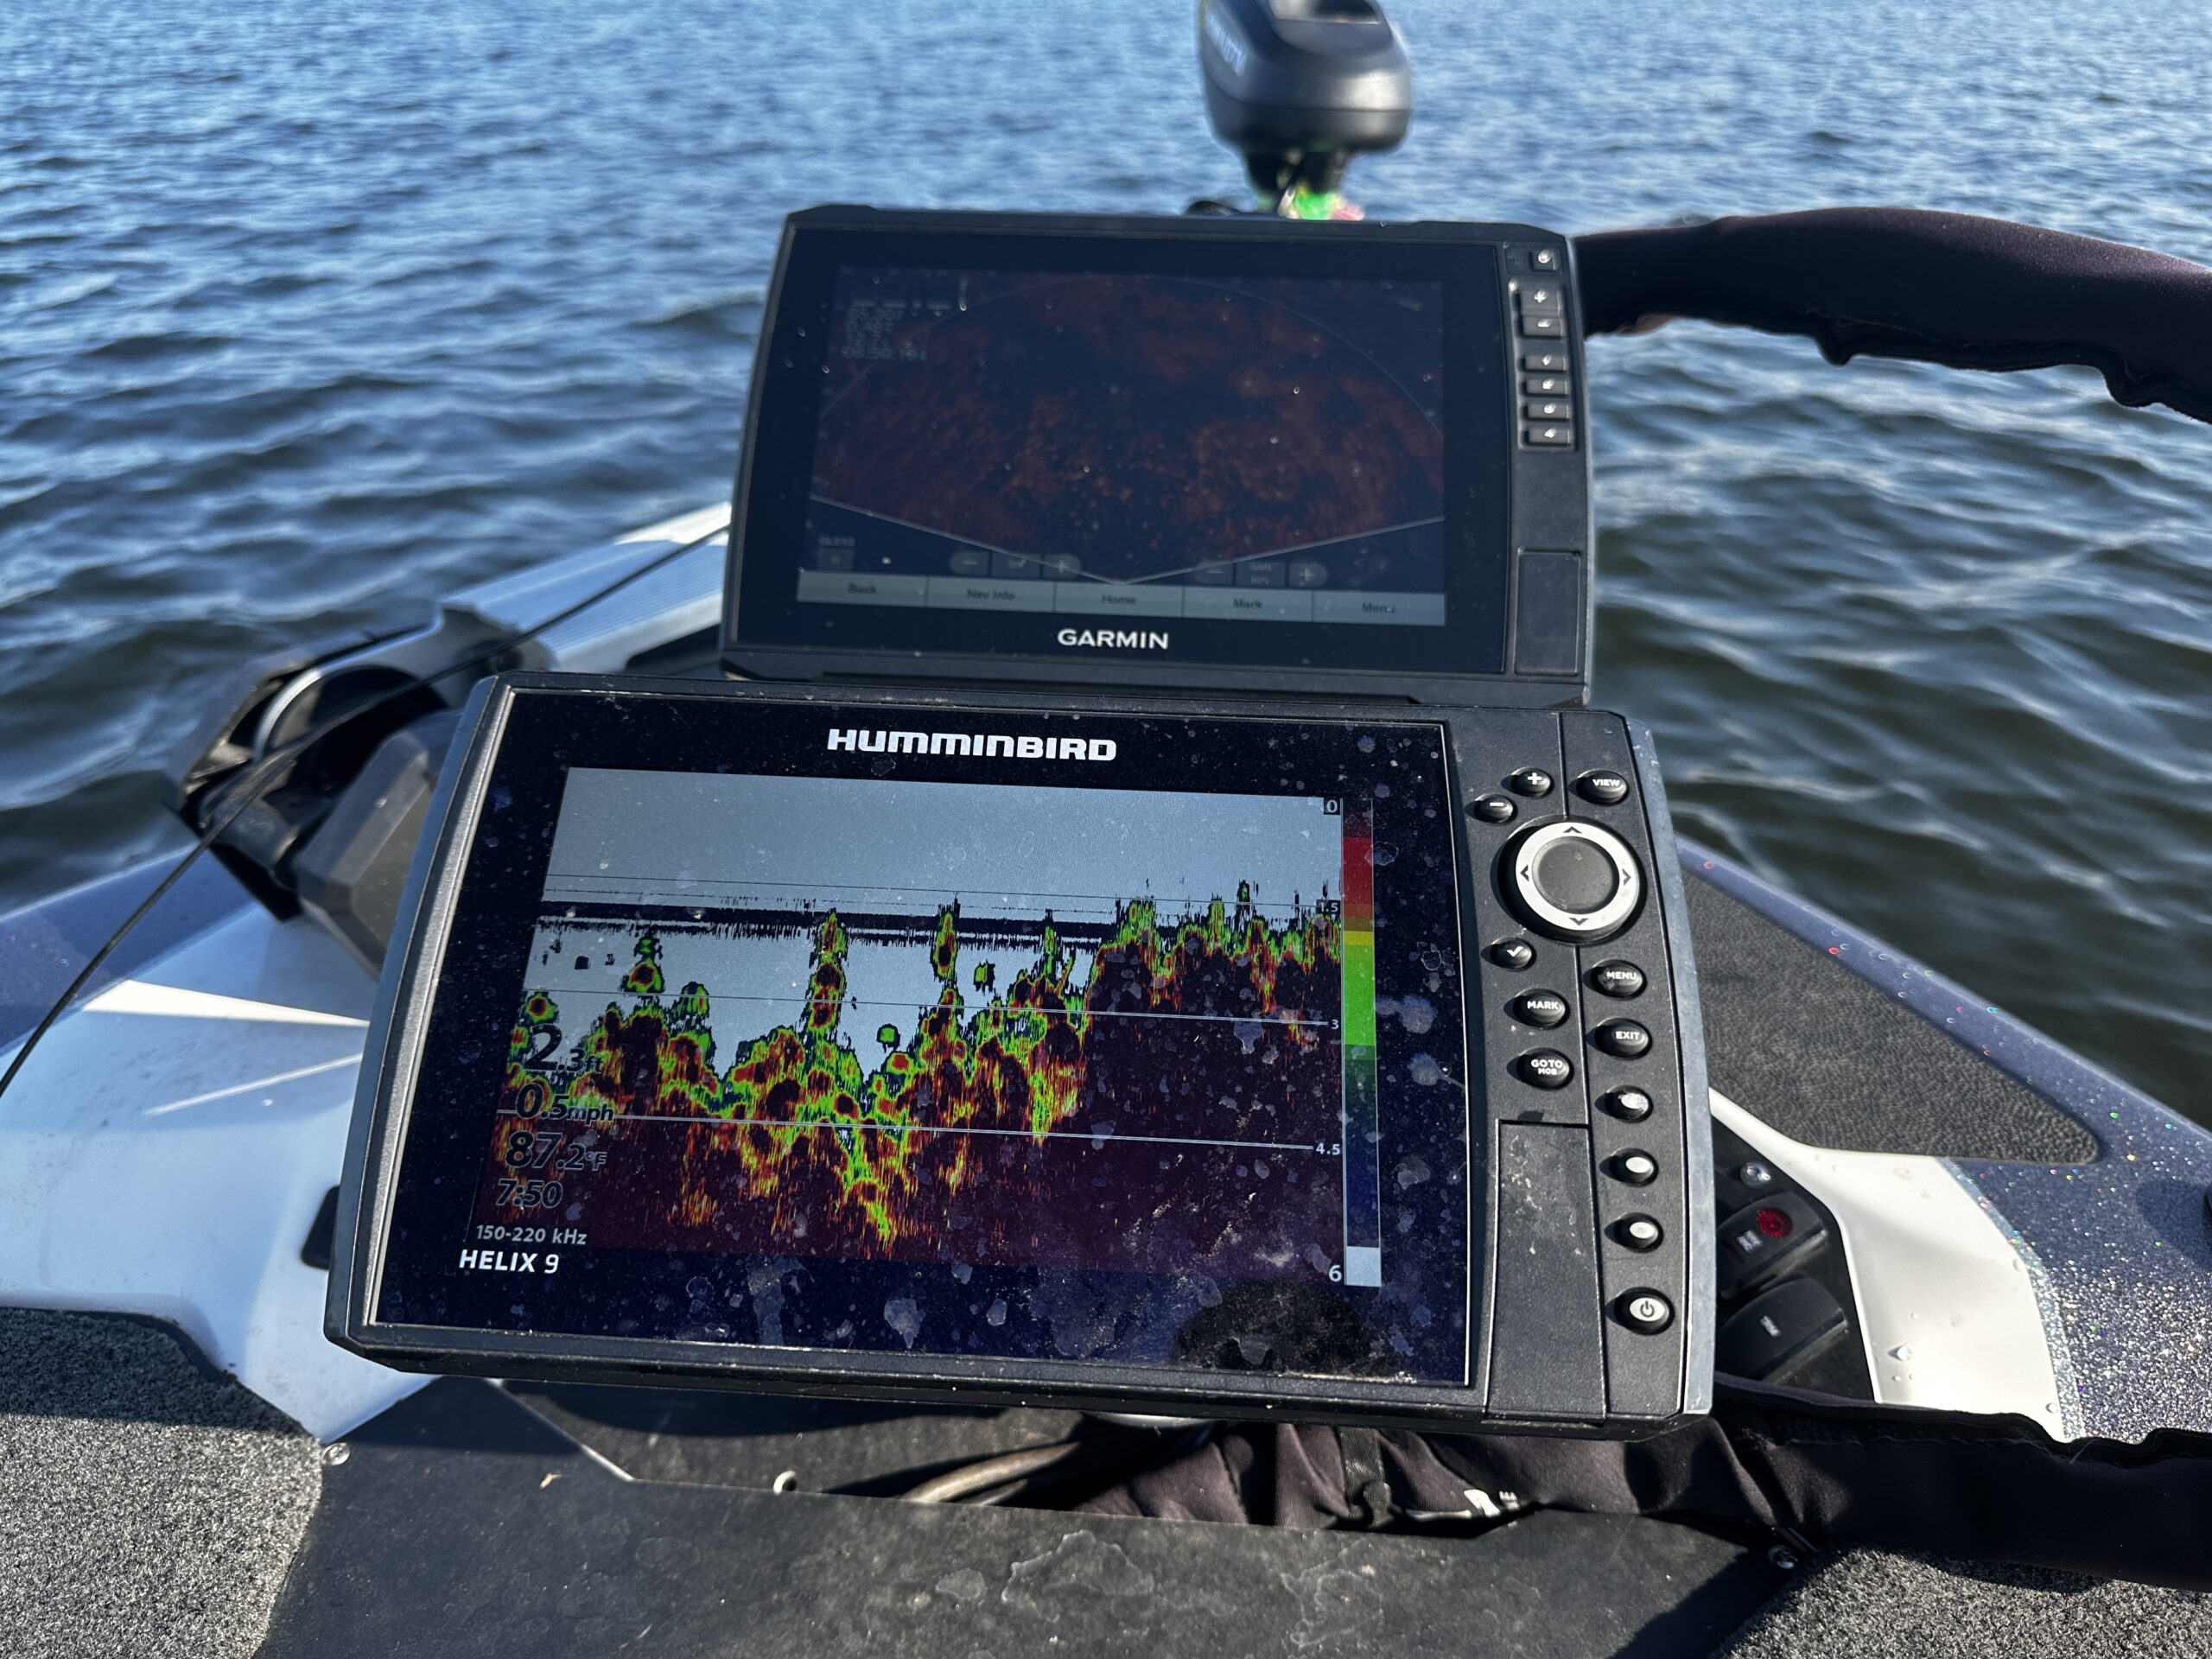 Two of the best fish finders, the Humminbird Helix and Garmin Echomap